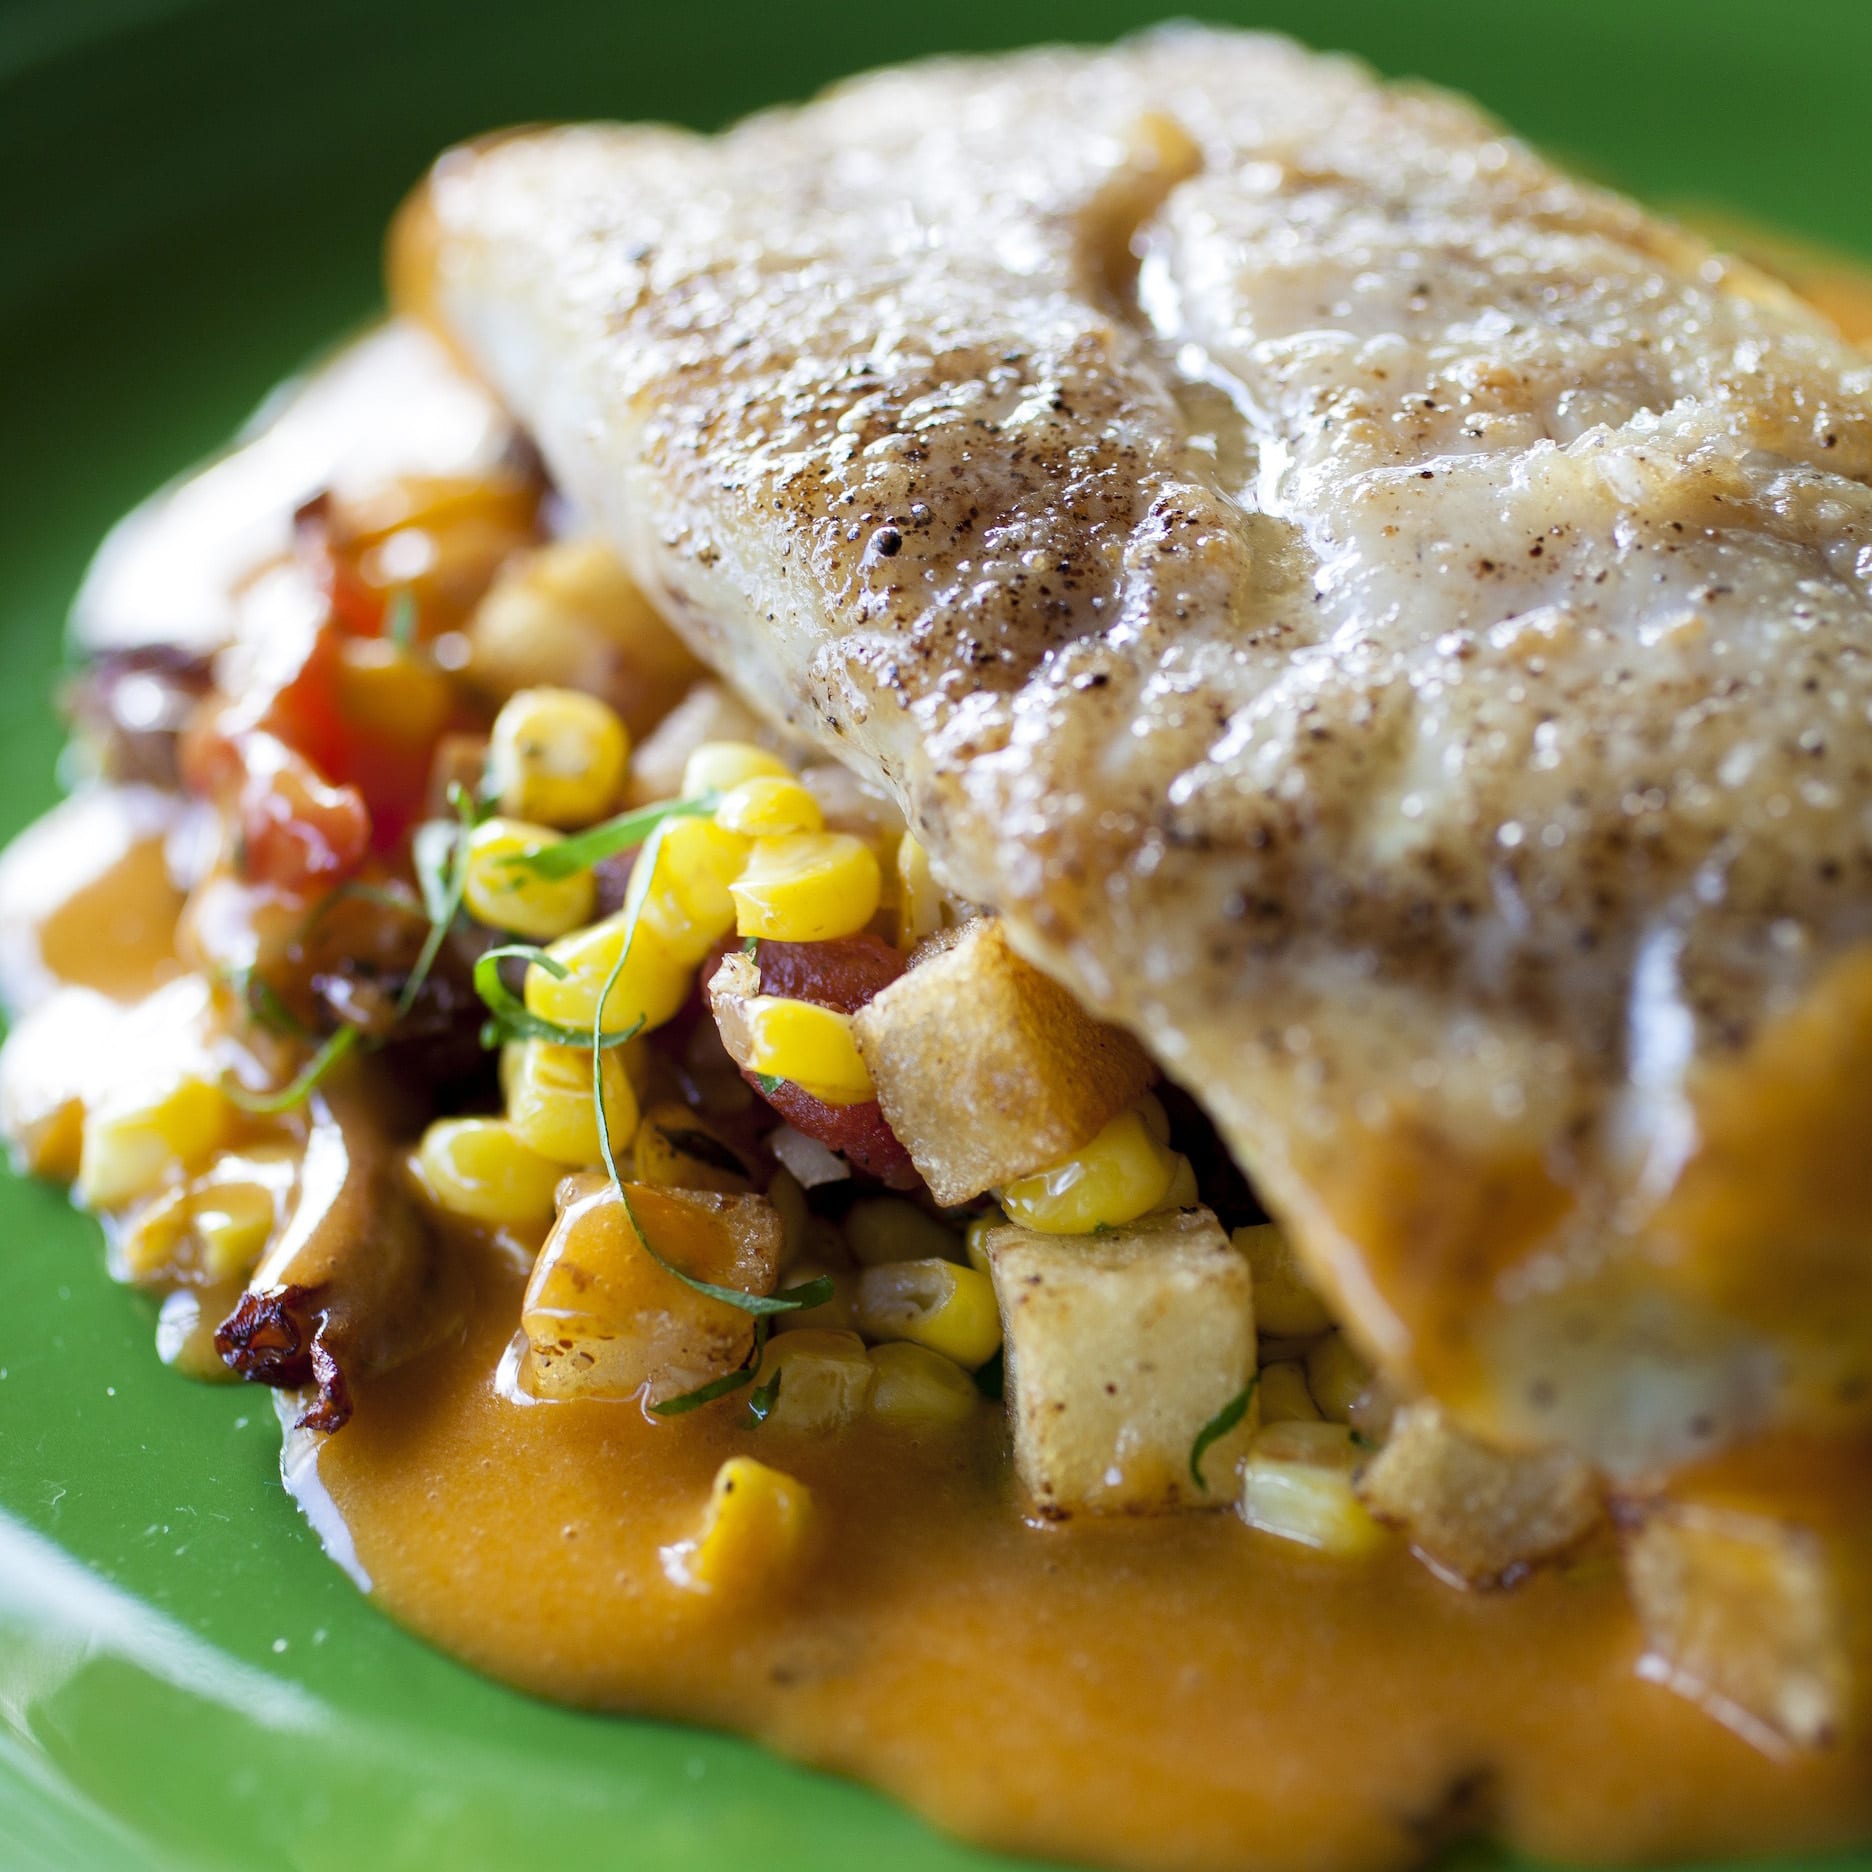 Sautéed Redfish with Chanterelles, Creole Tomato Confit, Corn, Brabants,  and Spicy Beurre Blanc